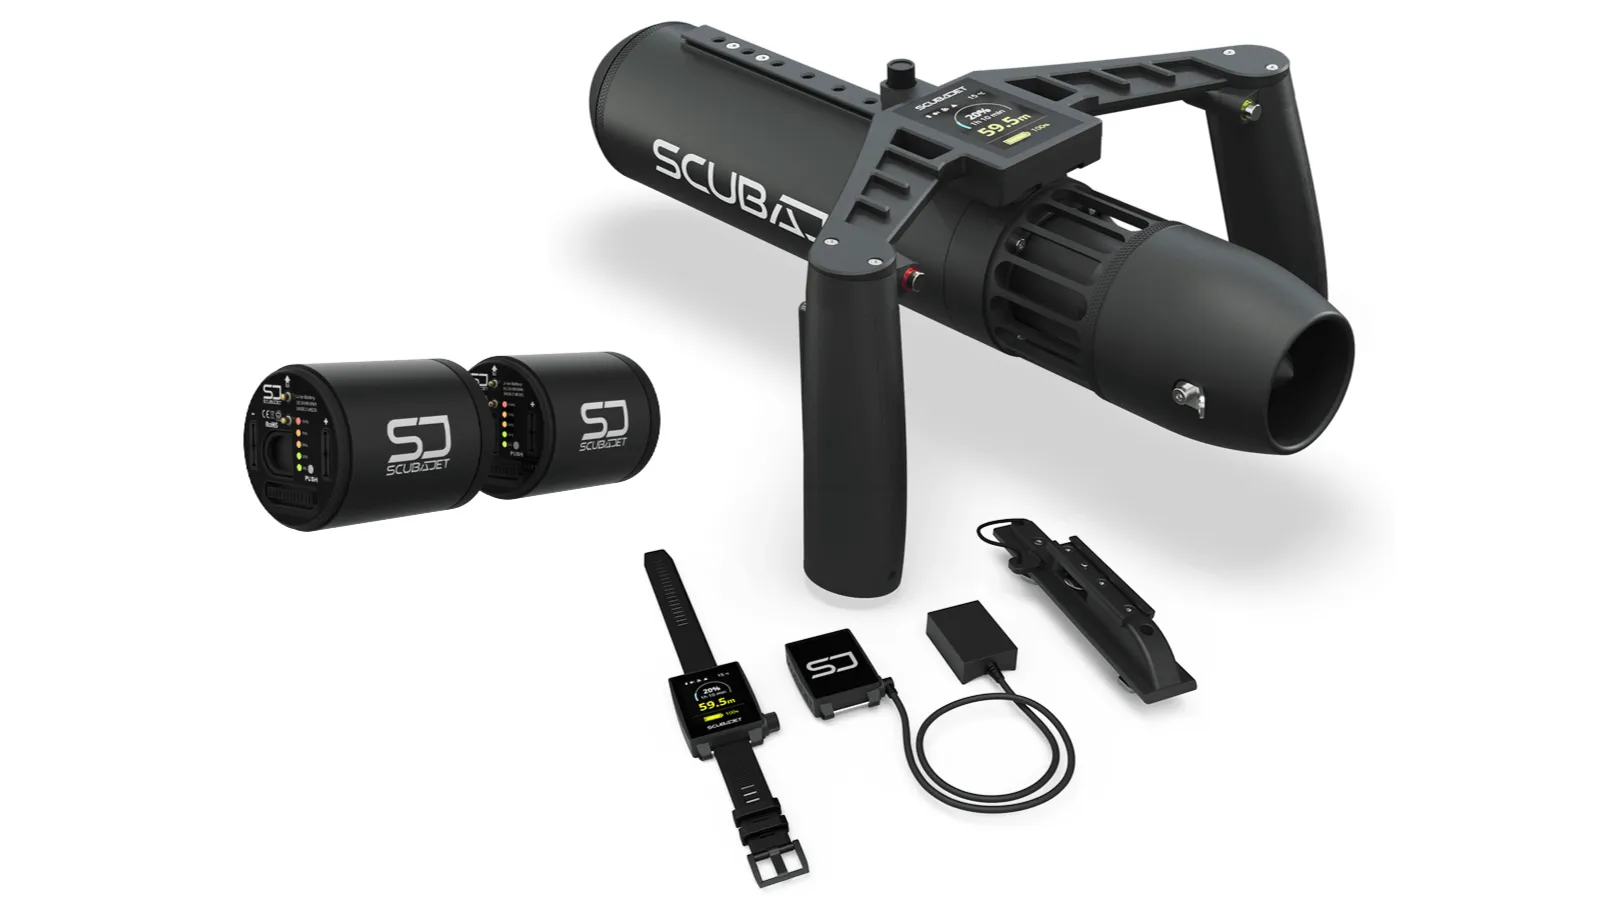 SCUBAJET PRO All-in-One Dive Scooter and SUP Motor